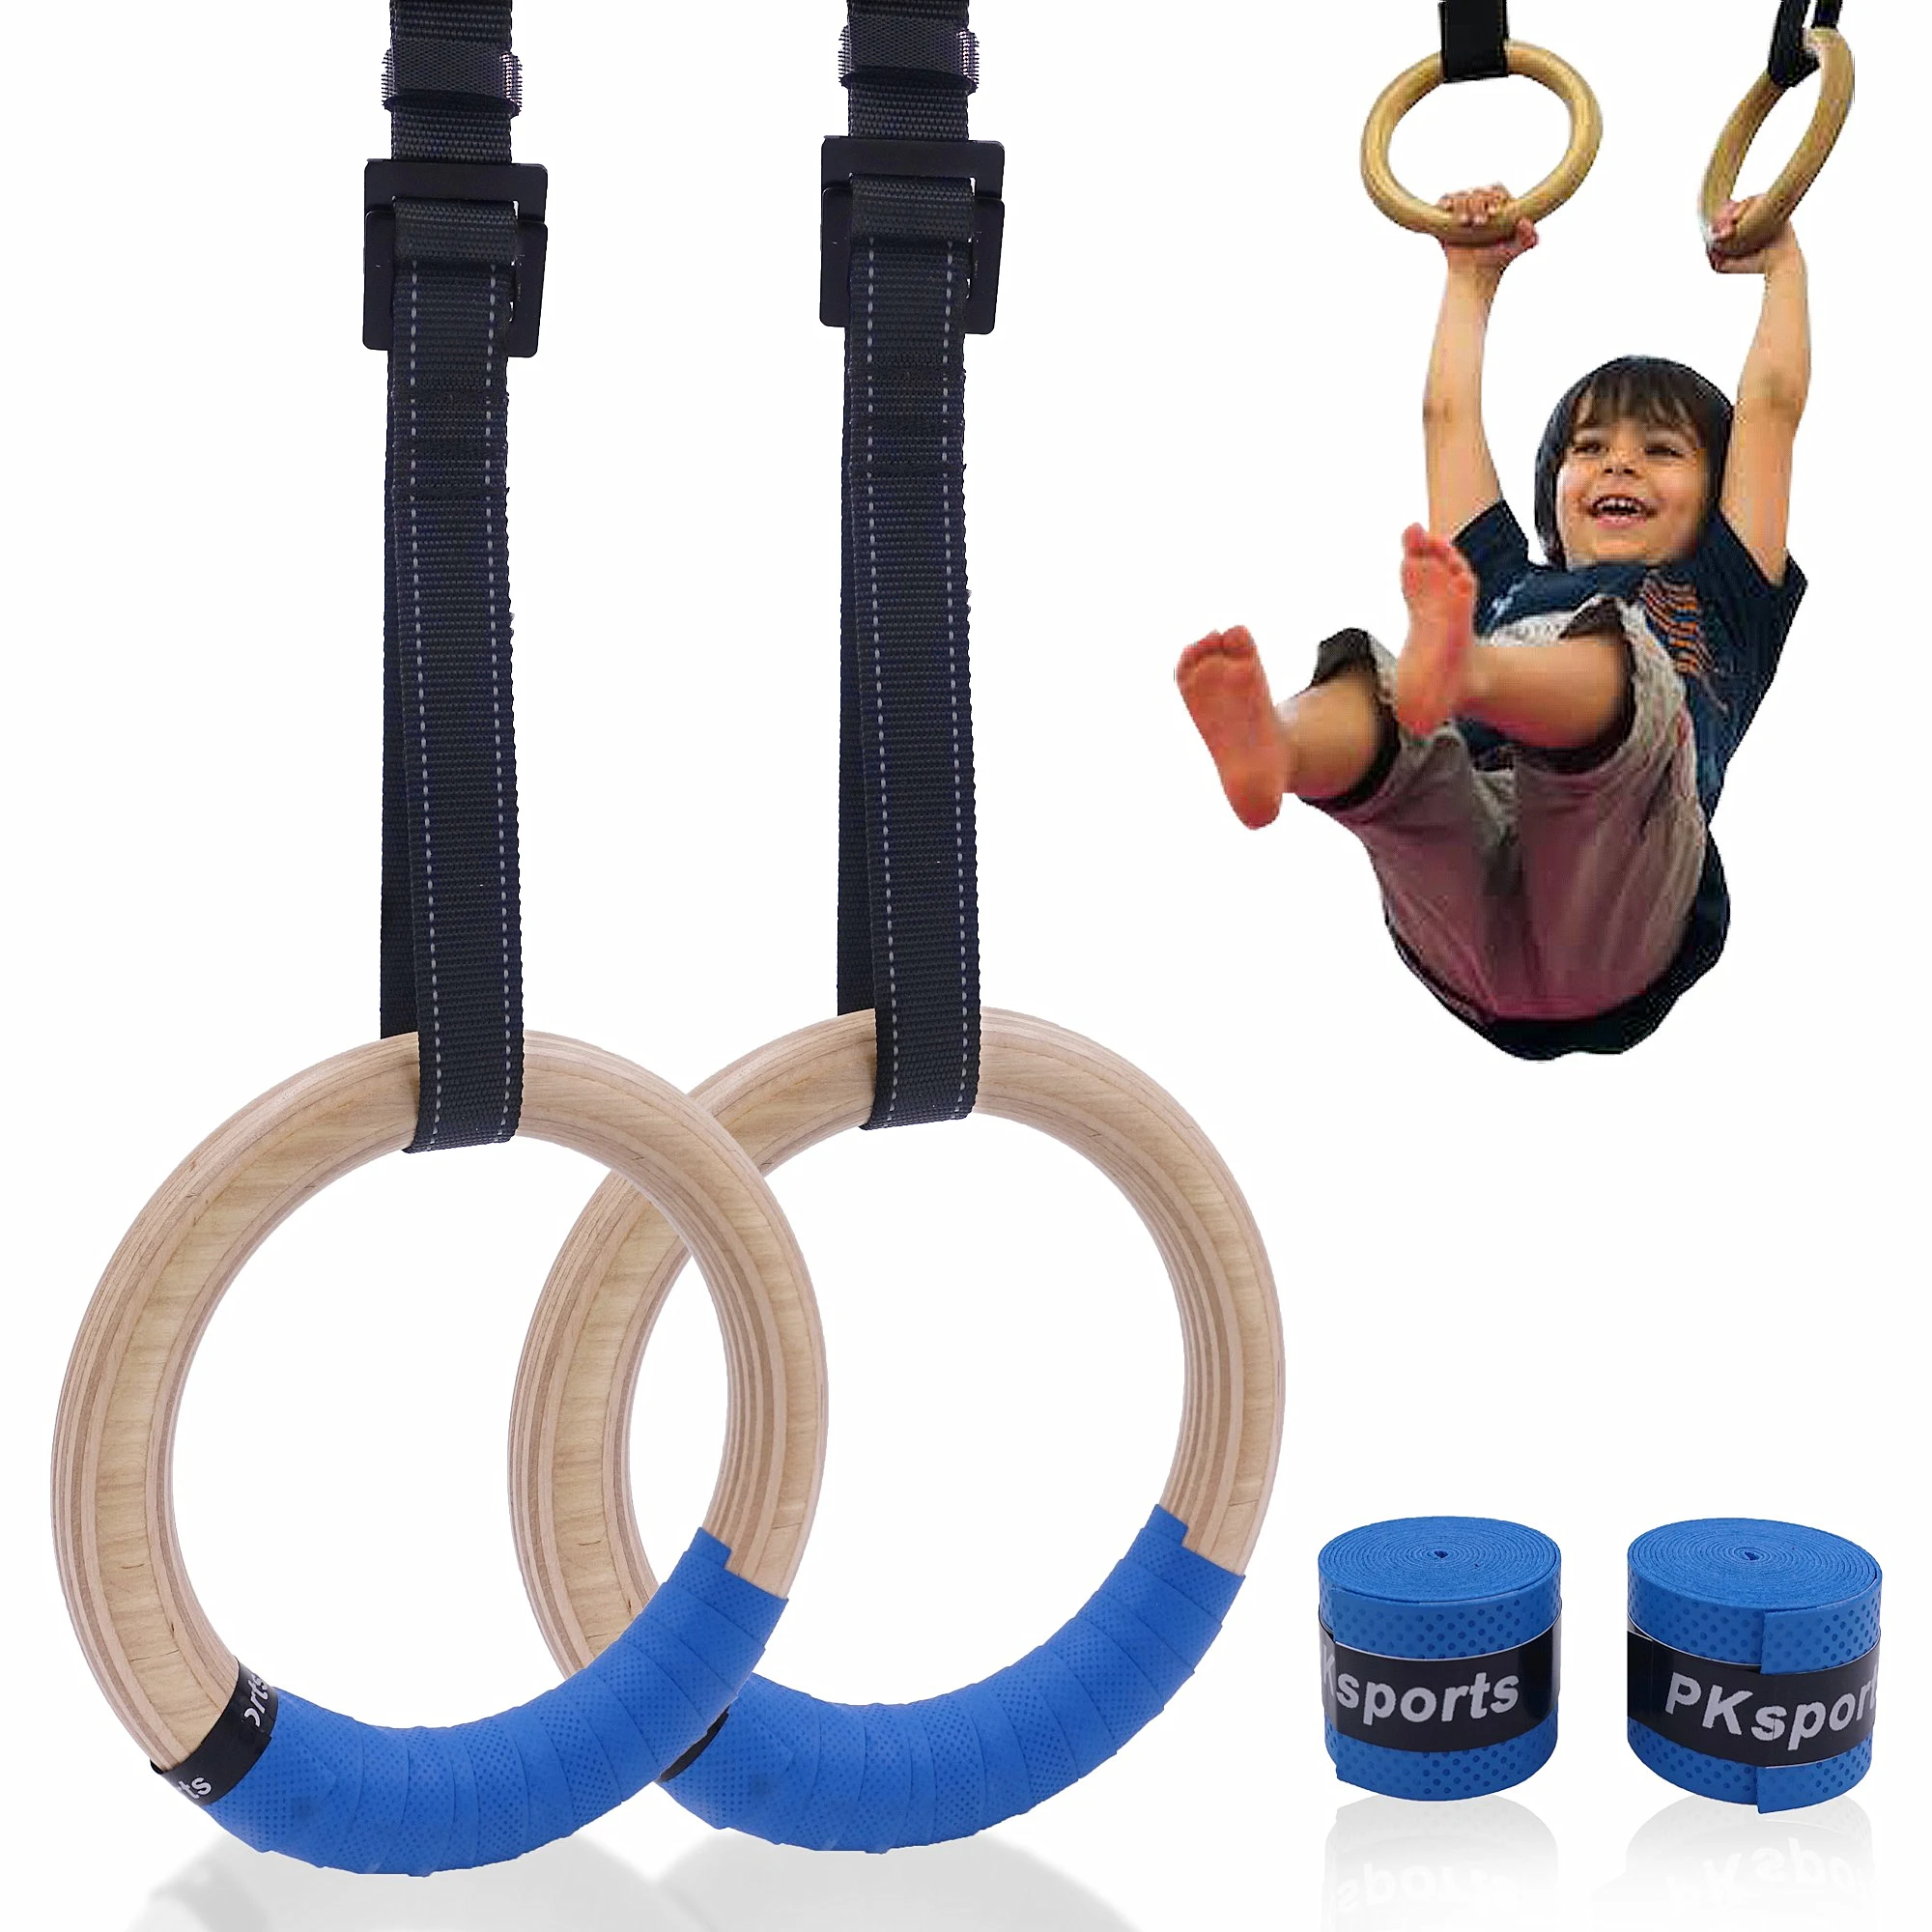 Wooden Gymnastic Rings for Kids 25mm Gym Ring with Adjustable Straps Buckles Indoor Fitness Crossfit Home Playground Gym Pull up